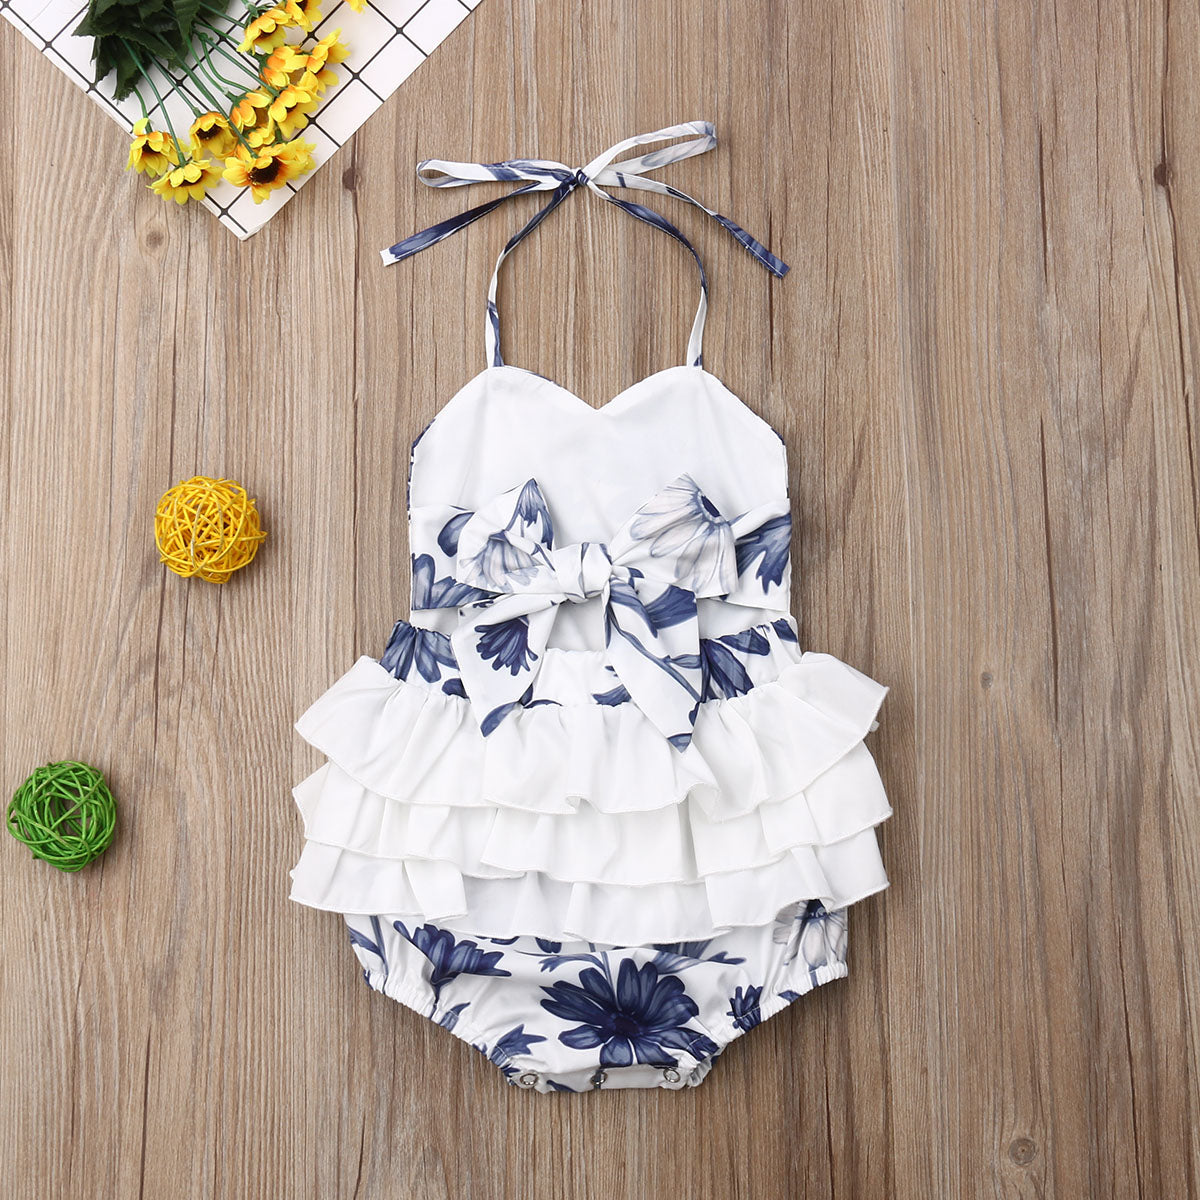 Spring Daisy Romper - Abby Apples Boutique